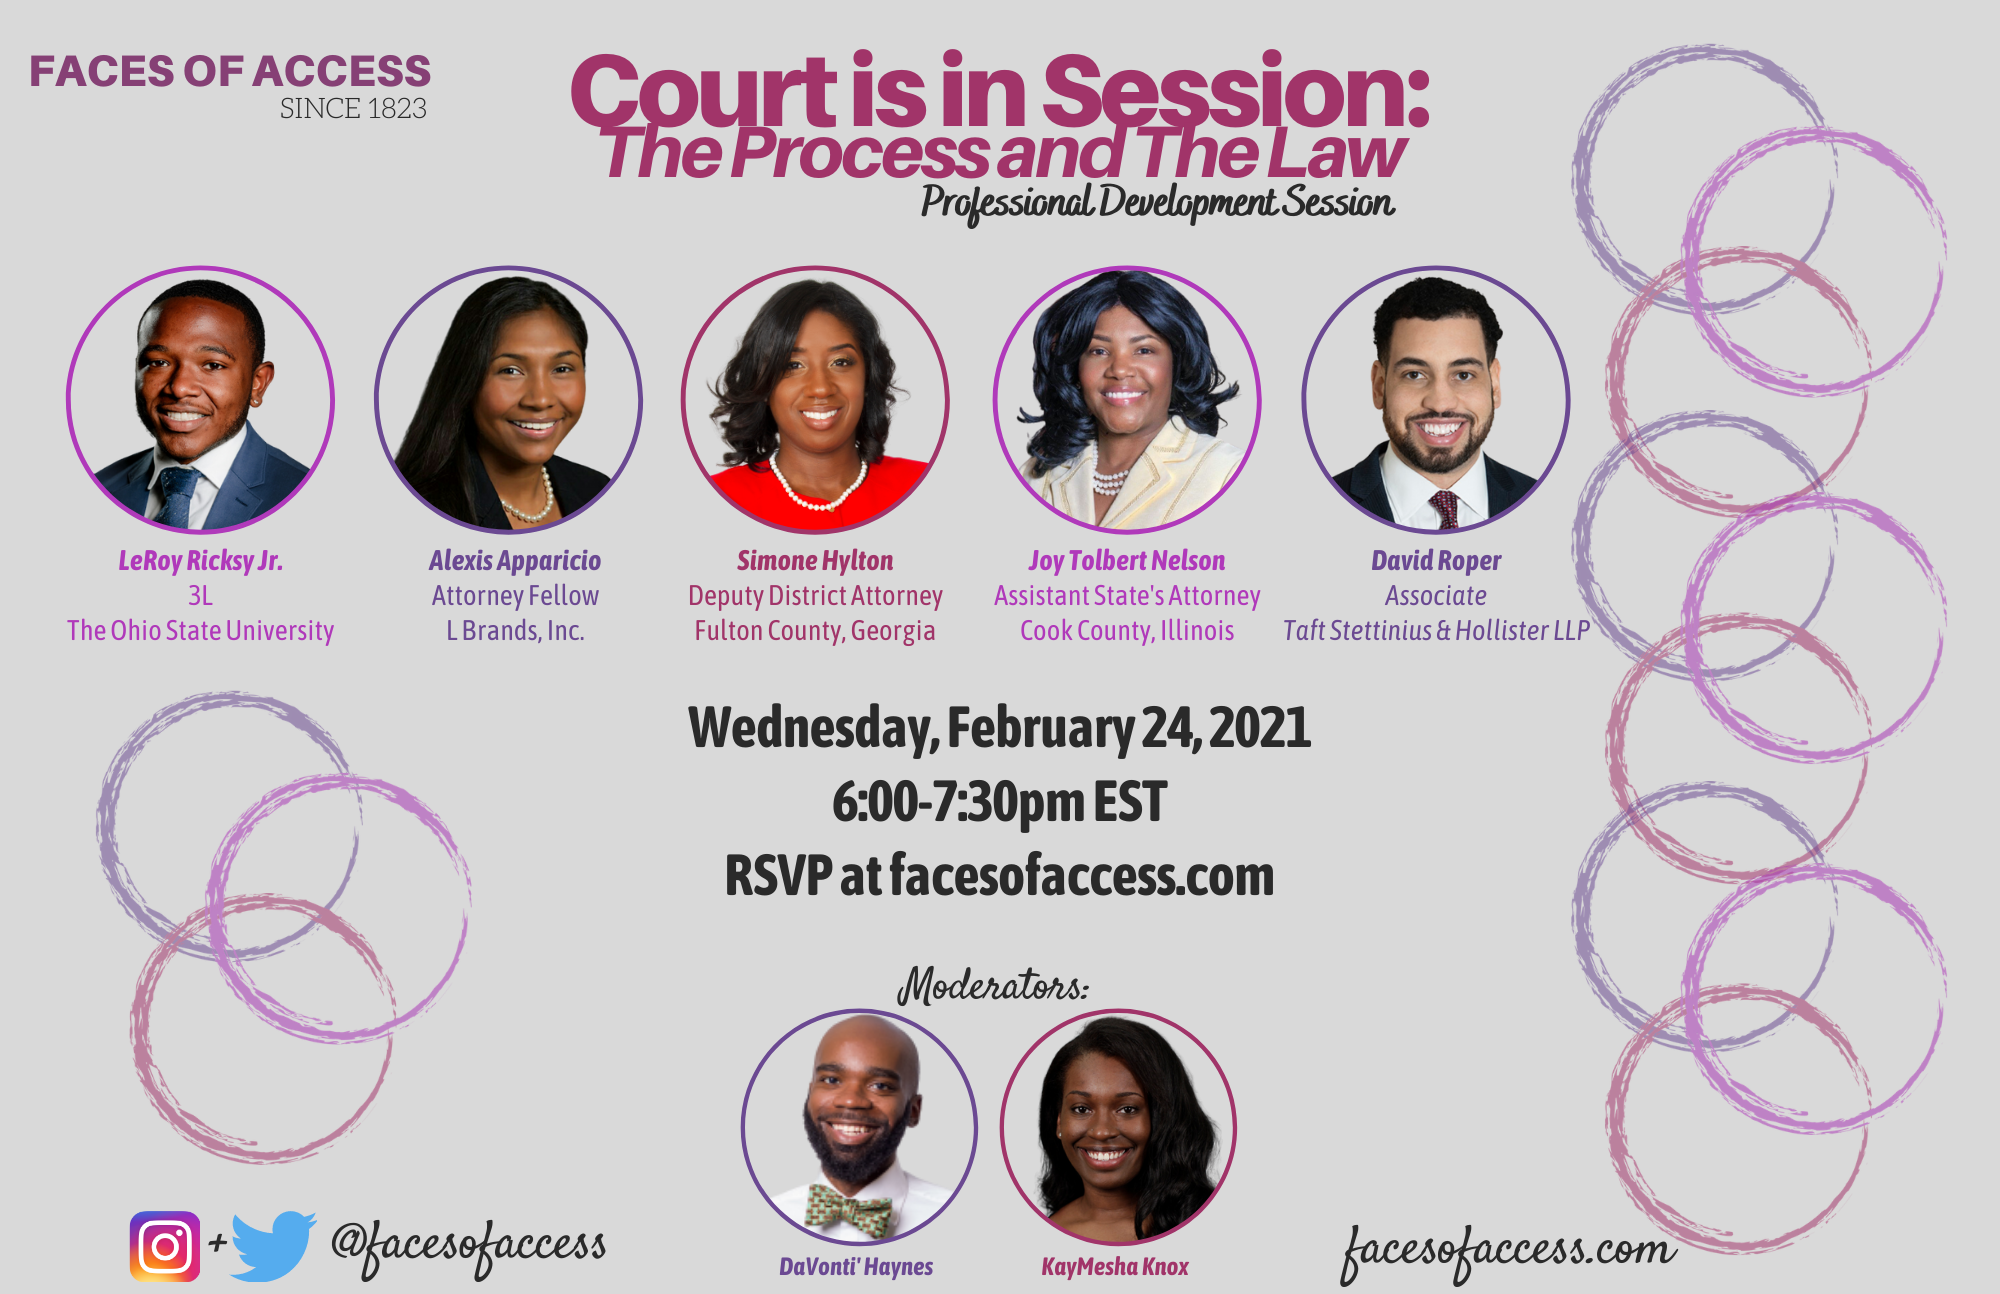   Court is in Session: The Process and The Law  session featuring:  Alexis Apparicio, Attorney Fellow, L Brands, Inc.; Simone Hylton, Deputy District Attorney, Fulton County, Georgia; Joy Tolbert Nelson, Assistant State’s Attorney, Cook County, Illin